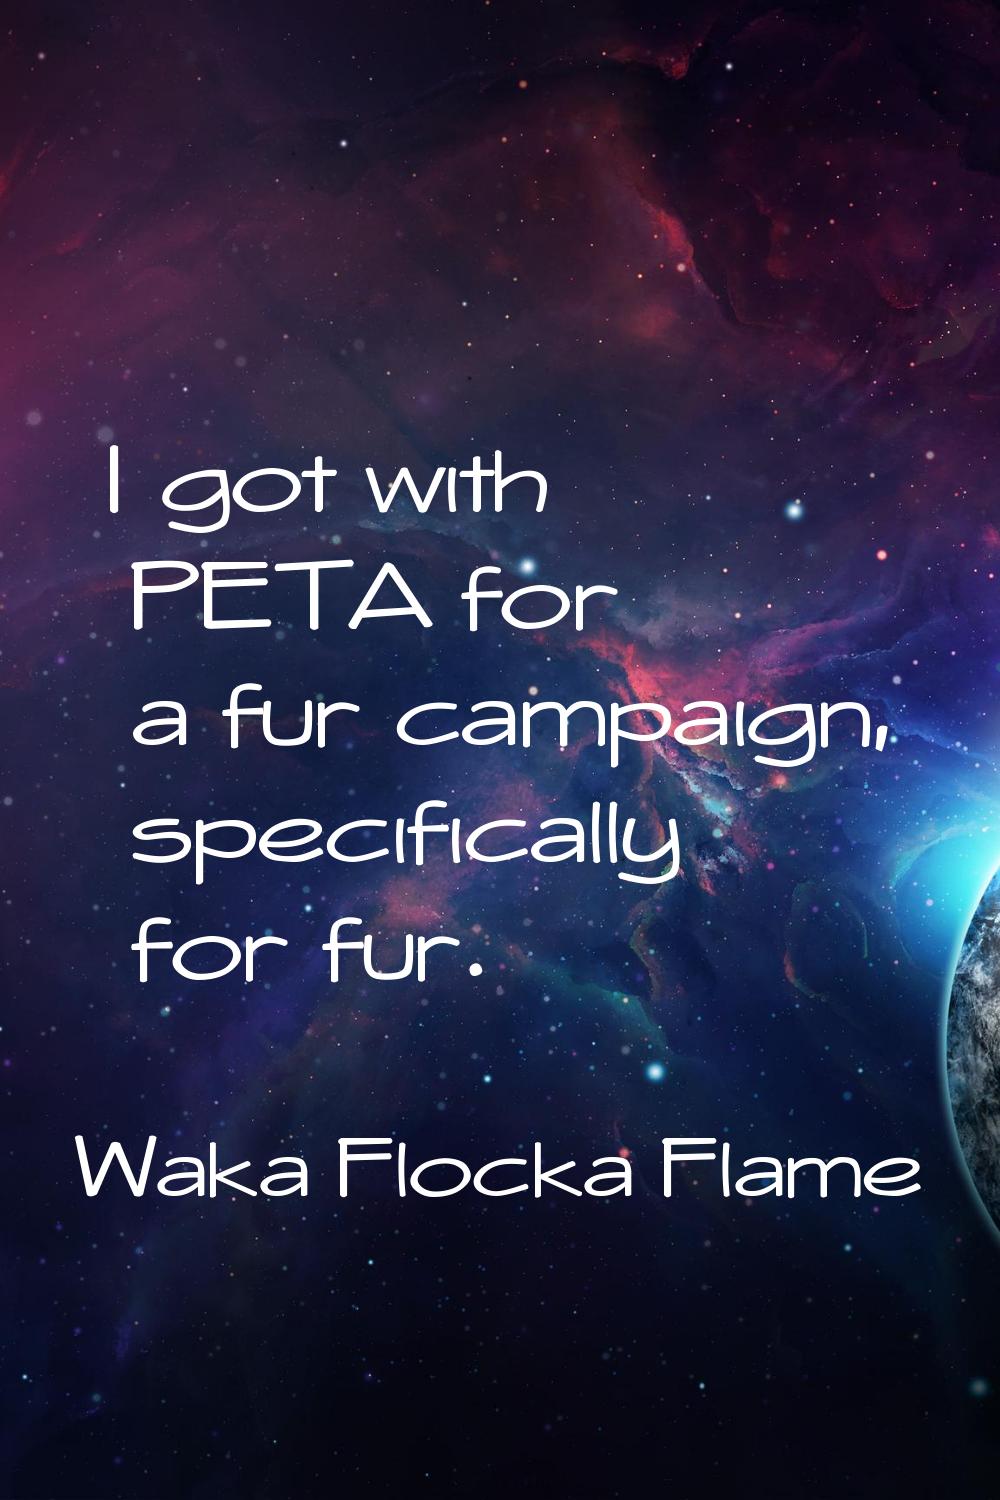 I got with PETA for a fur campaign, specifically for fur.